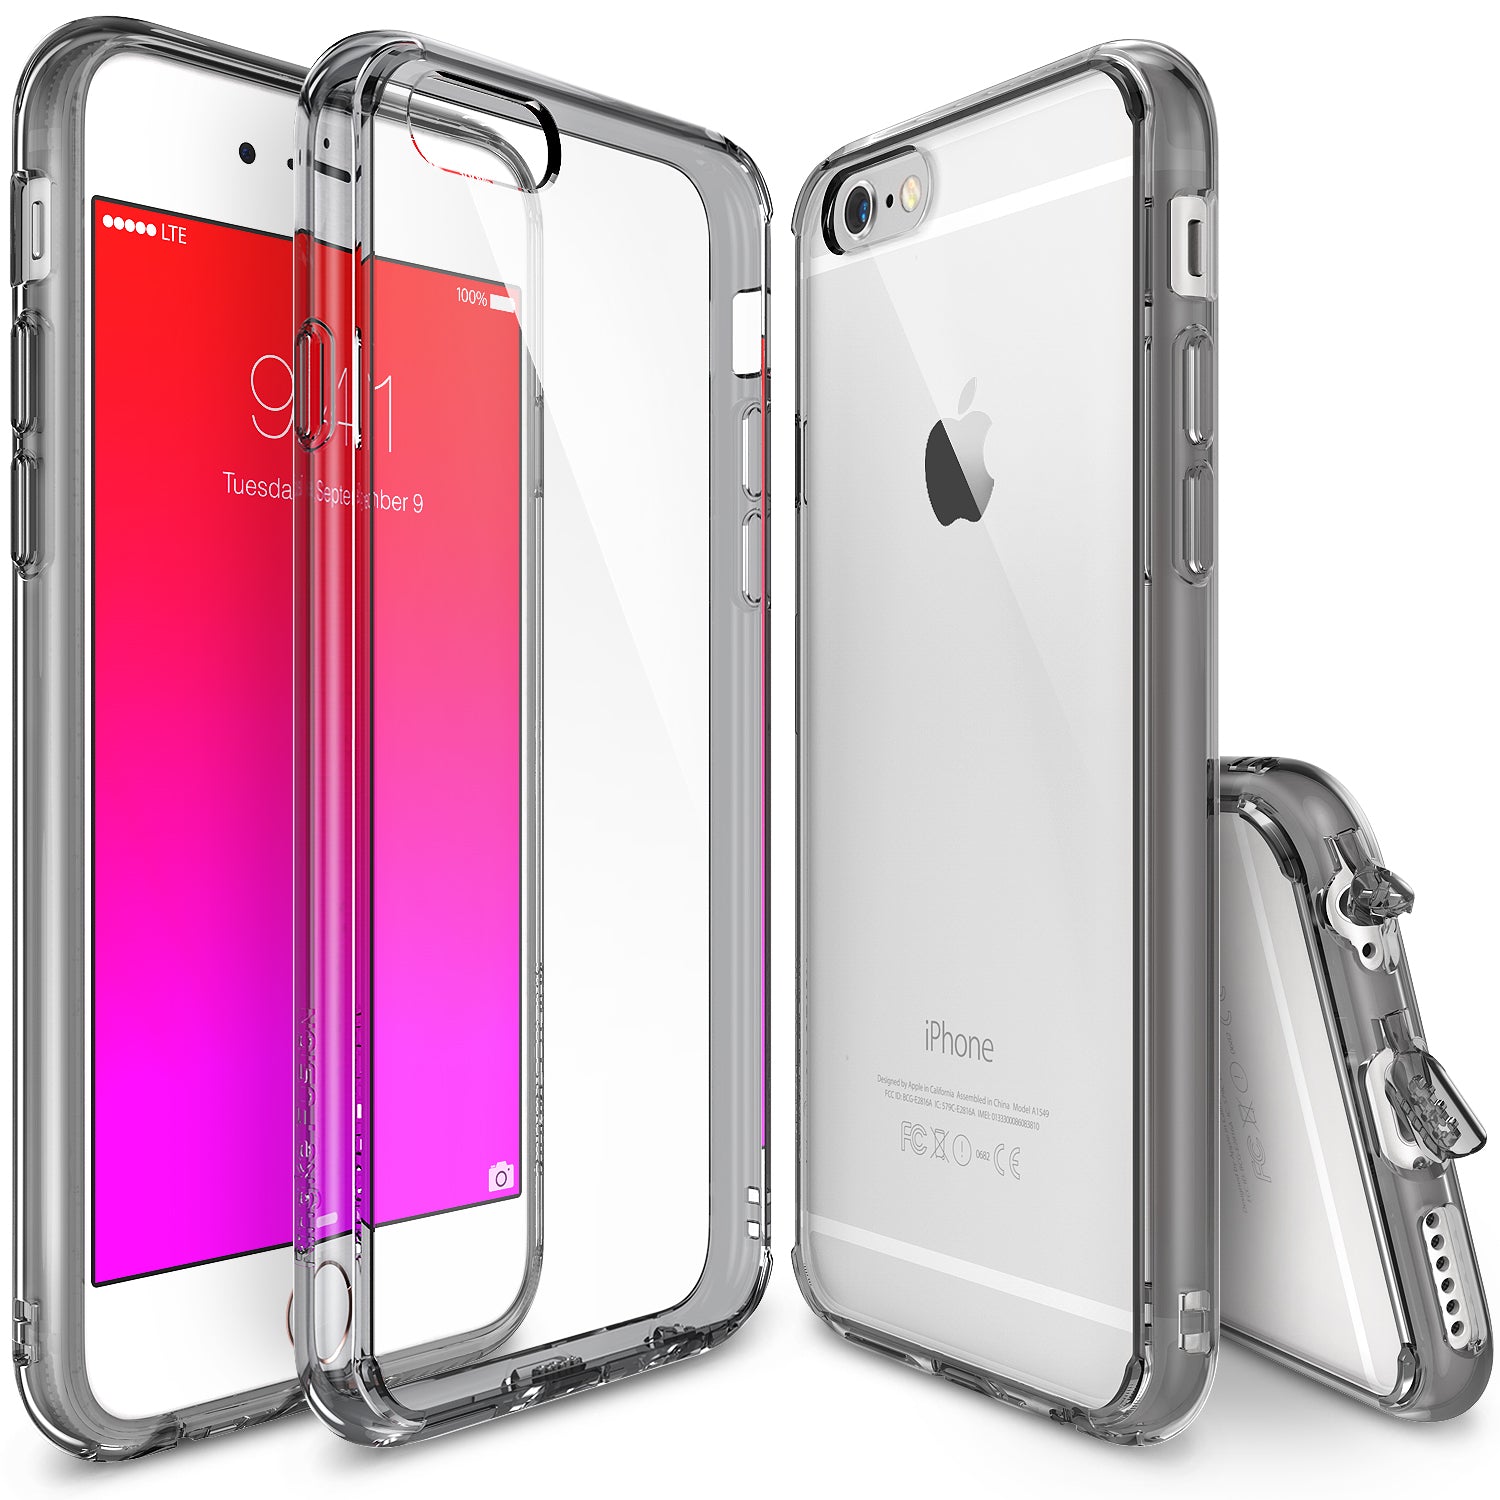 ringke fusion transparent clear back protective bumper case cover for iphone 6 plus 6s plus smoke black